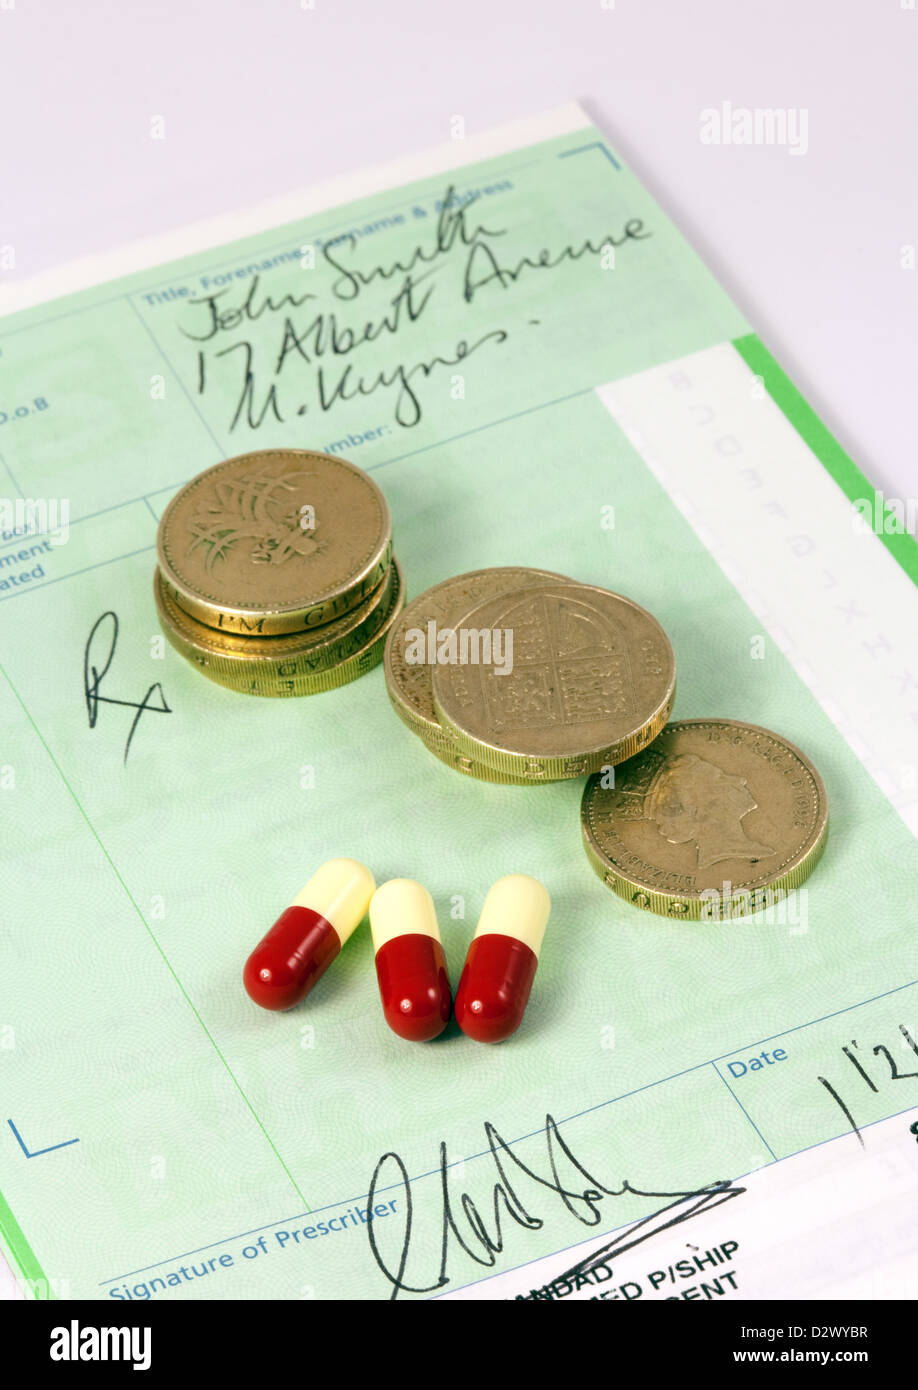 NHS prescription with pound coins and drugs to illustrate the concept of prescription drug costs, UK Stock Photo